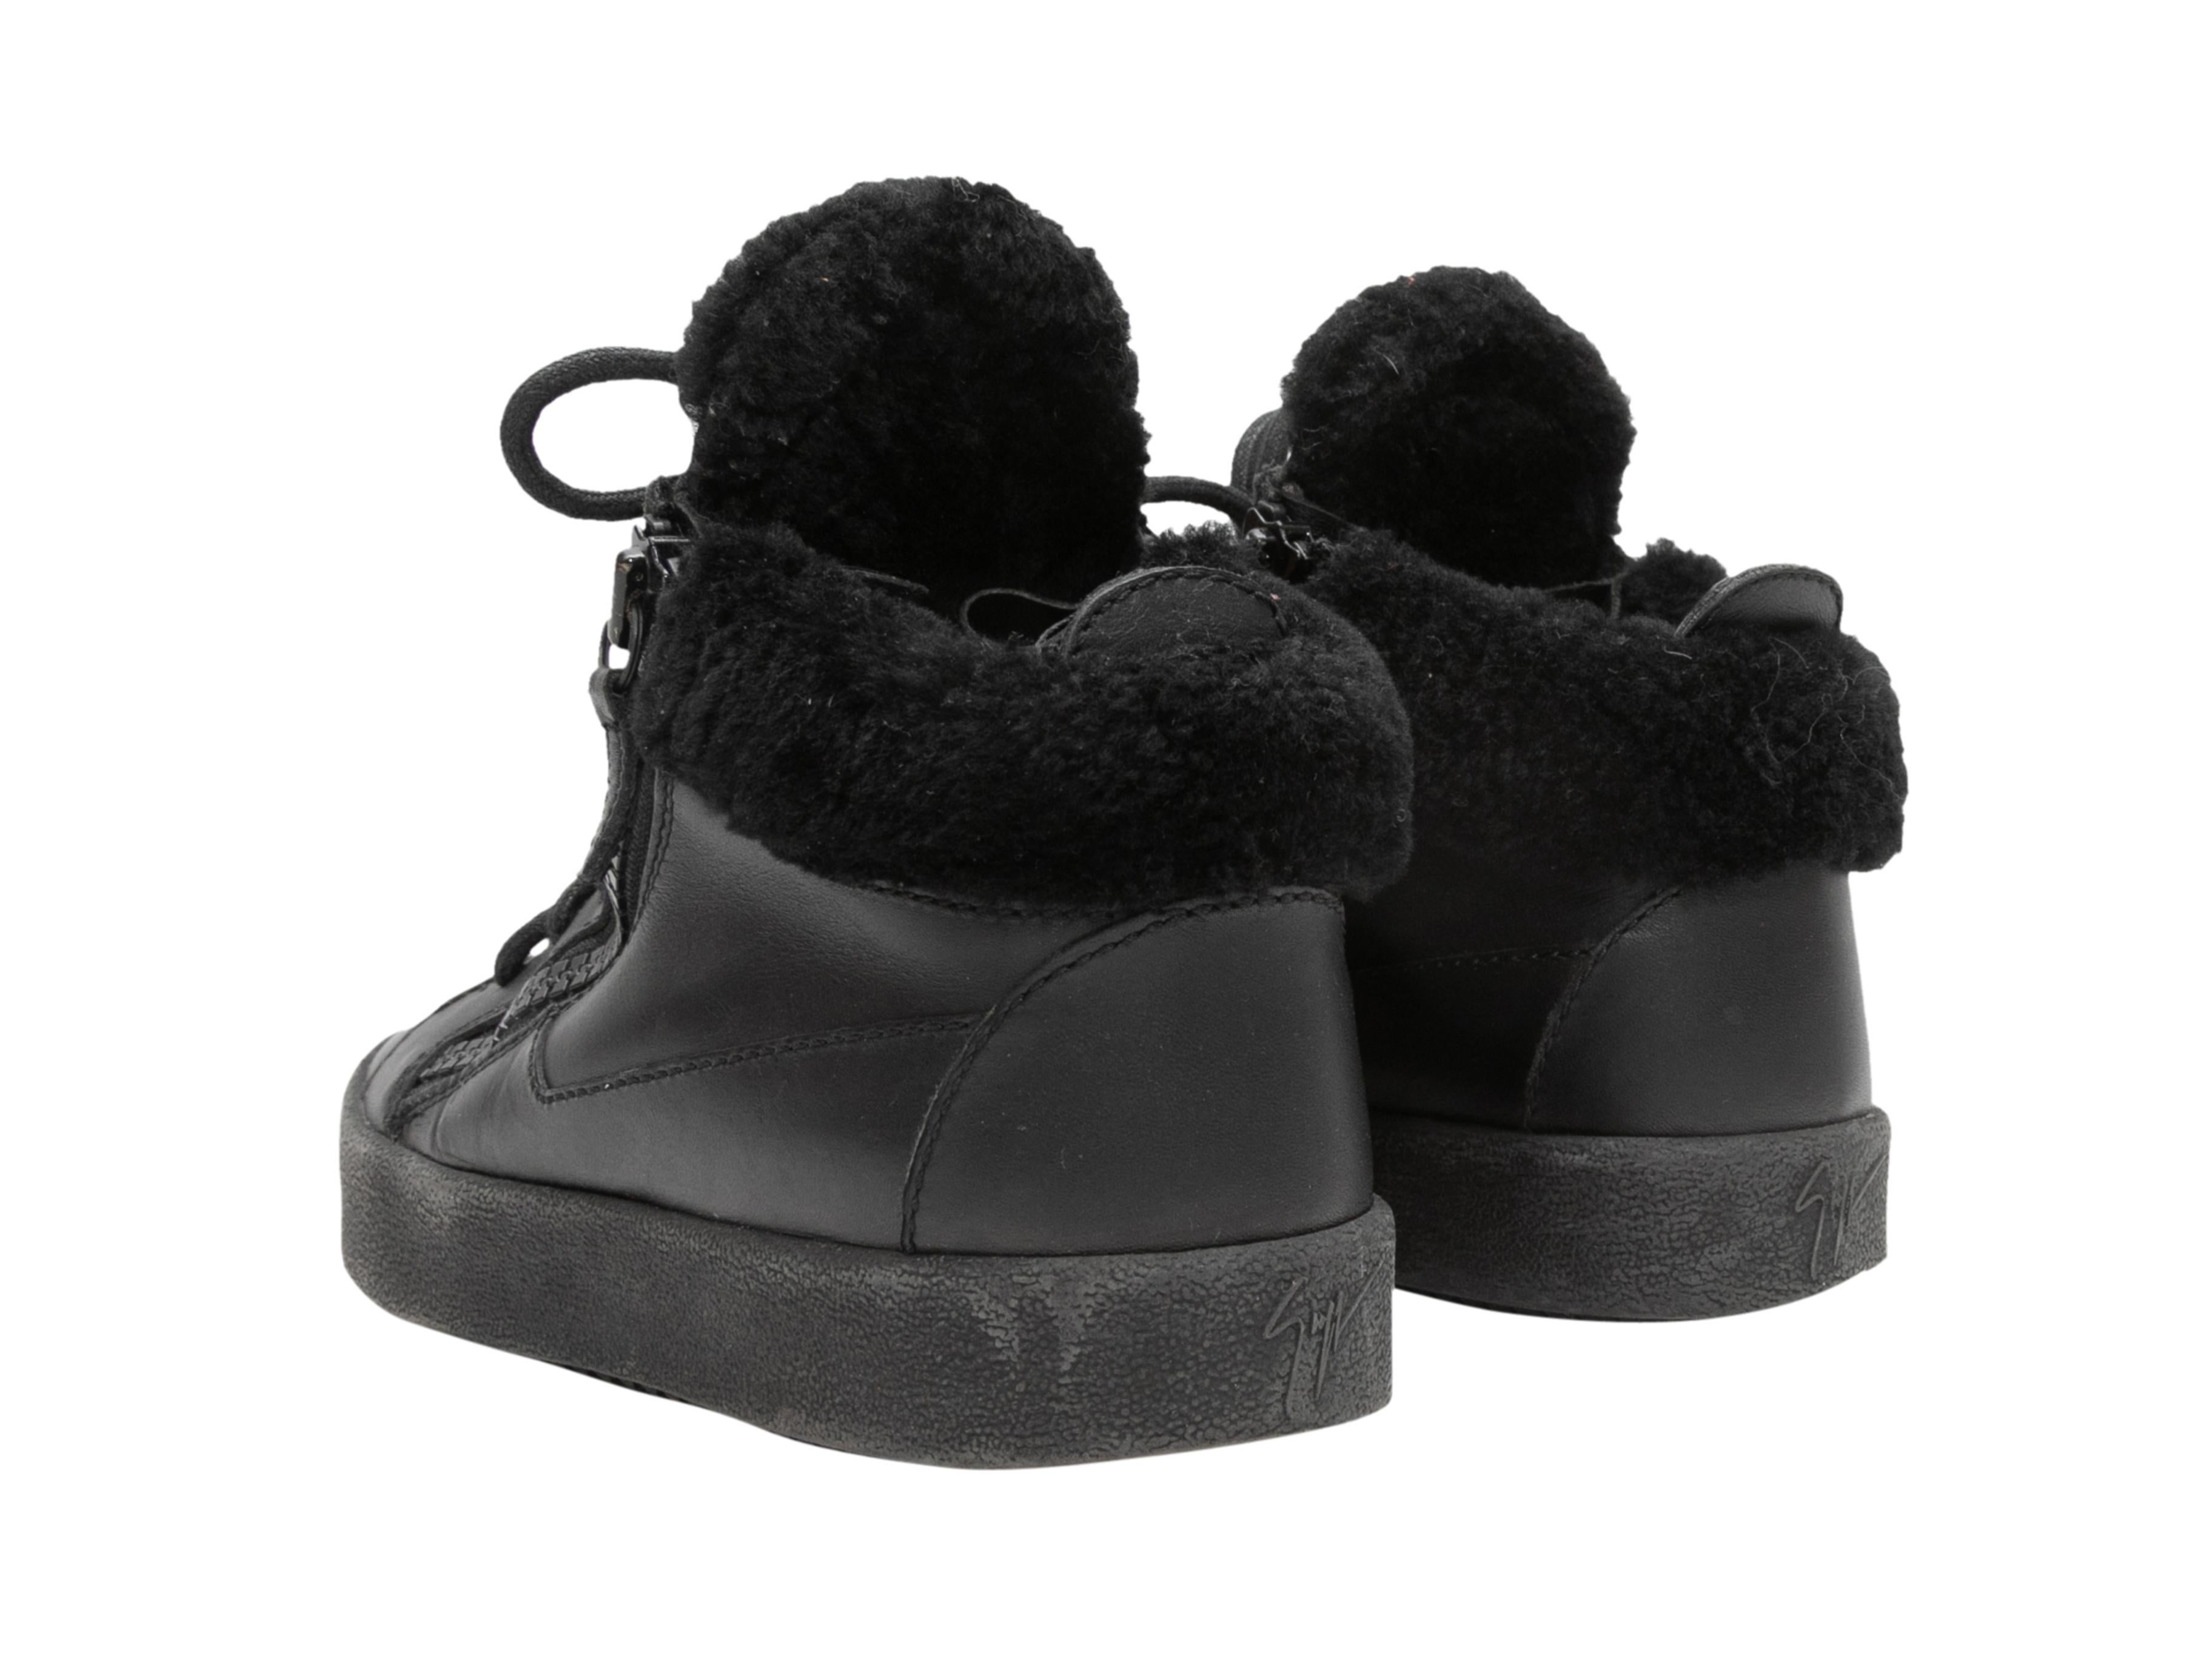 Black Giuseppe Zanotti High-Top Shearling-Trimmed Sneakers Size 36 In Good Condition For Sale In New York, NY